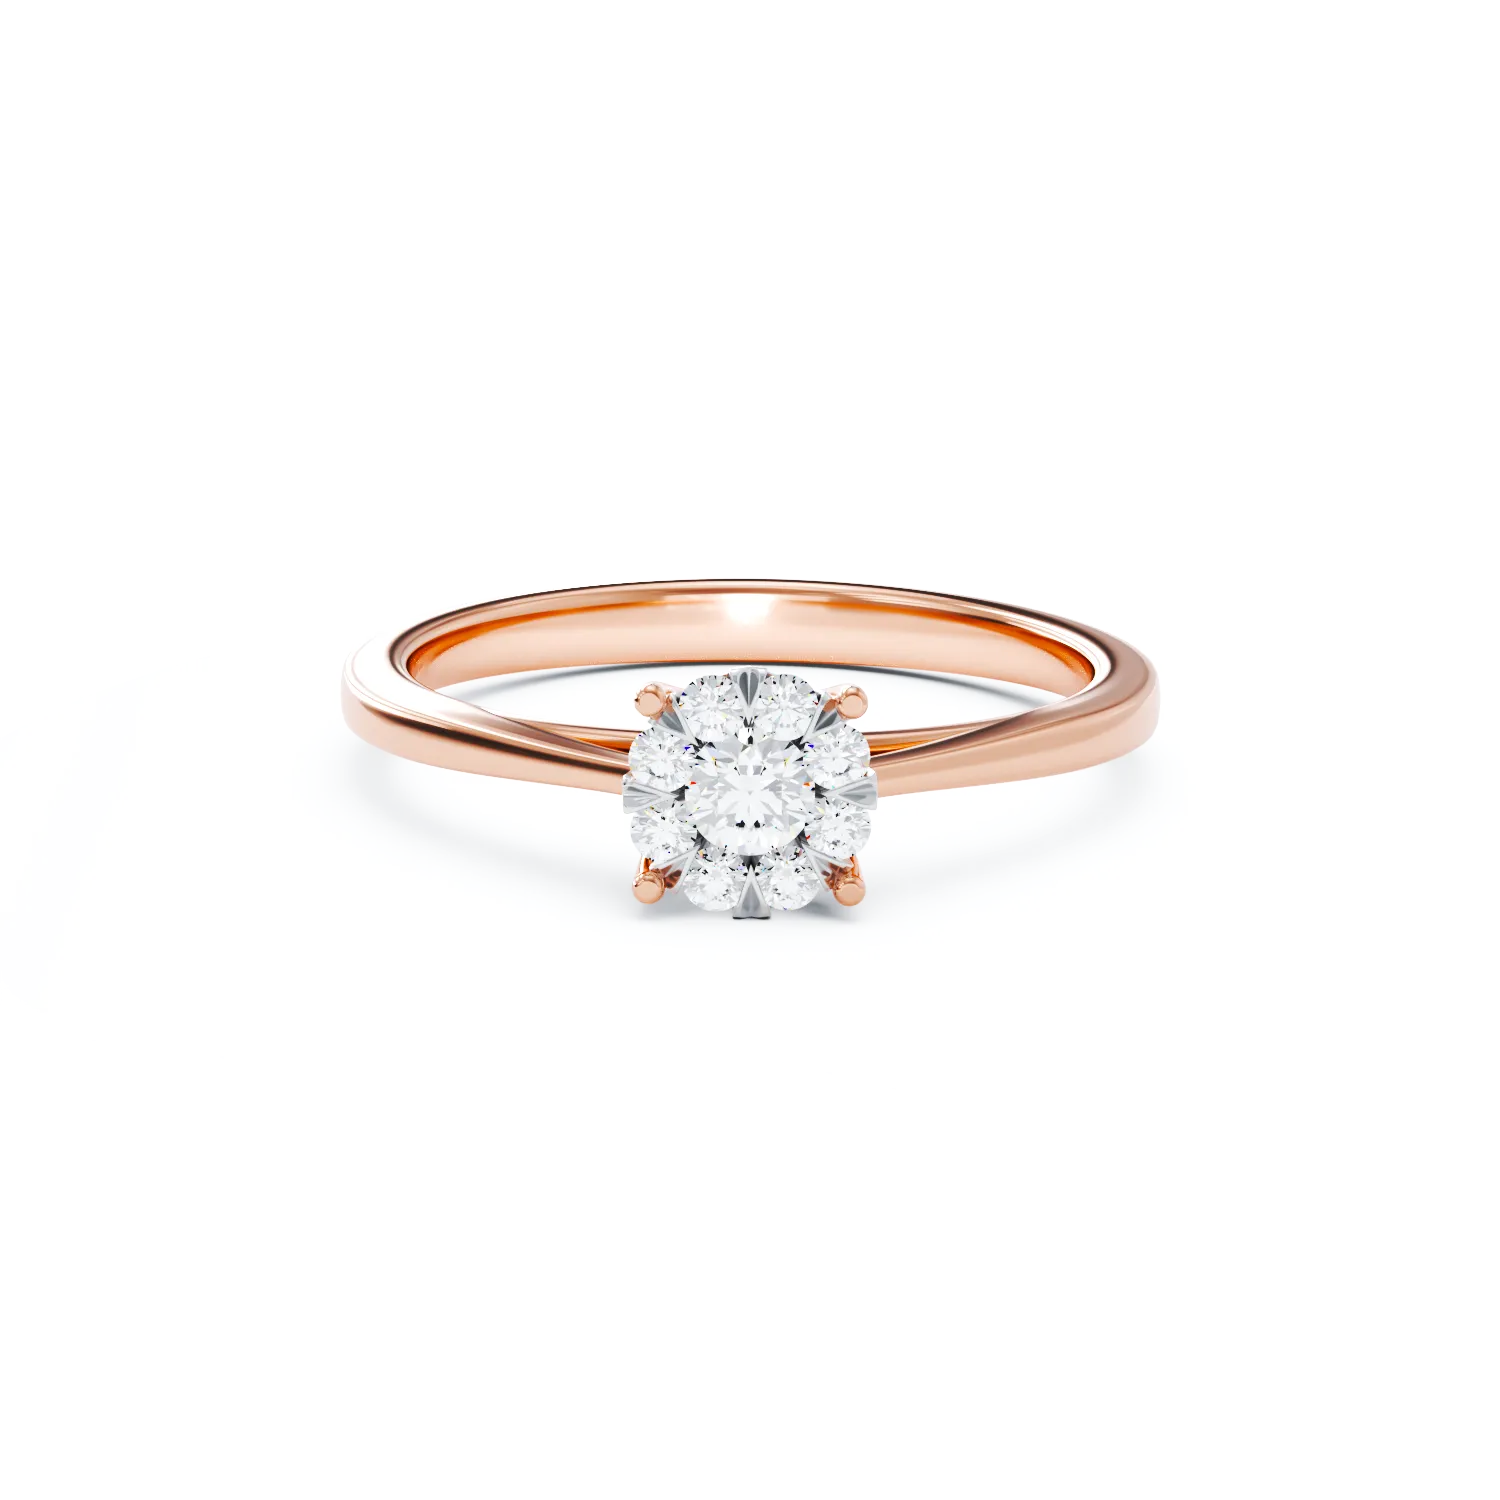 18K rose gold engagement ring with diamonds of 0.15ct